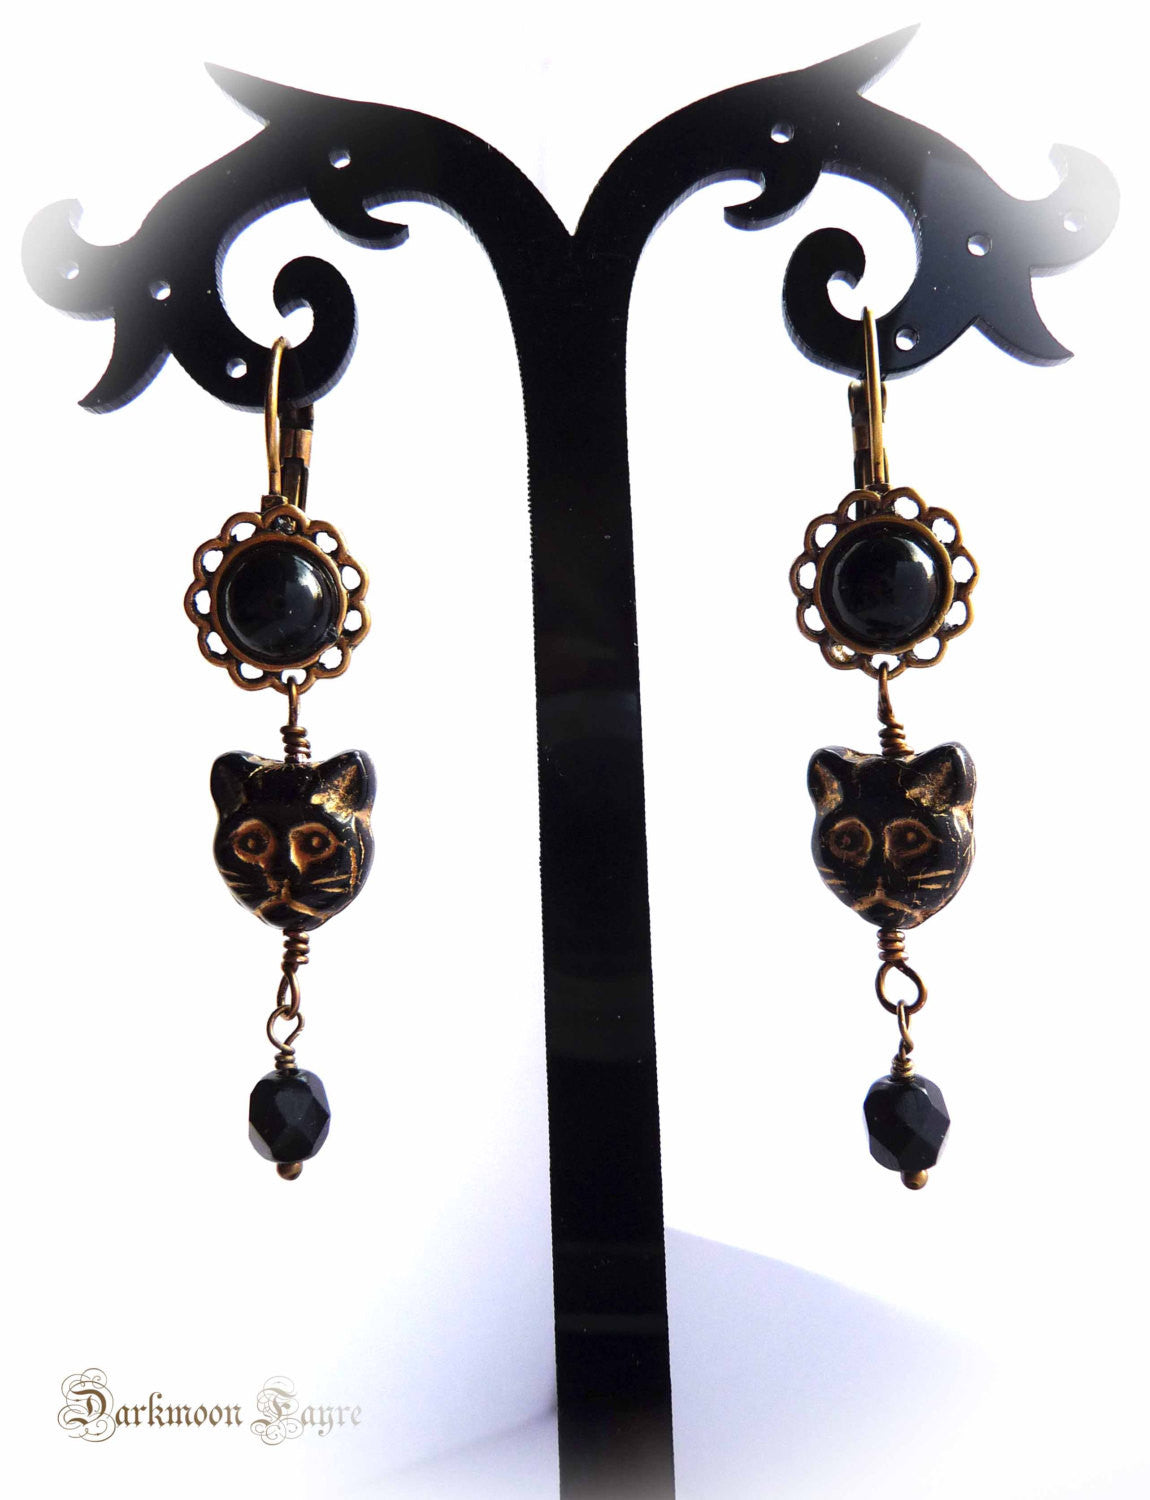 Black Cat Face Earrings. Czech Pressed and Fire Polished Faceted Glass. Antique Style Bronze - Darkmoon Fayre